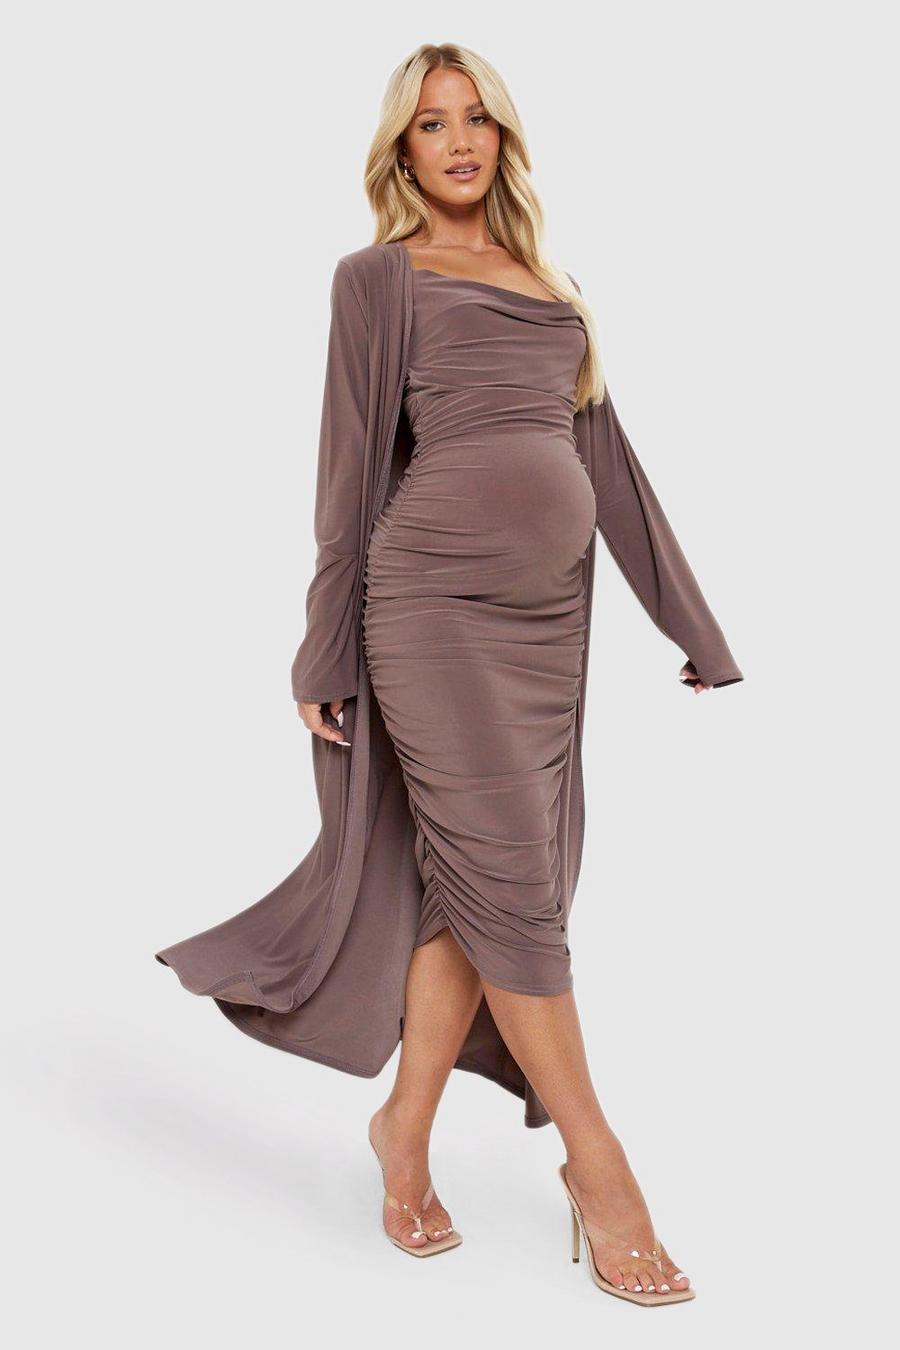 Mocha Maternity Strappy Cowl Neck Dress And Duster Coat image number 1